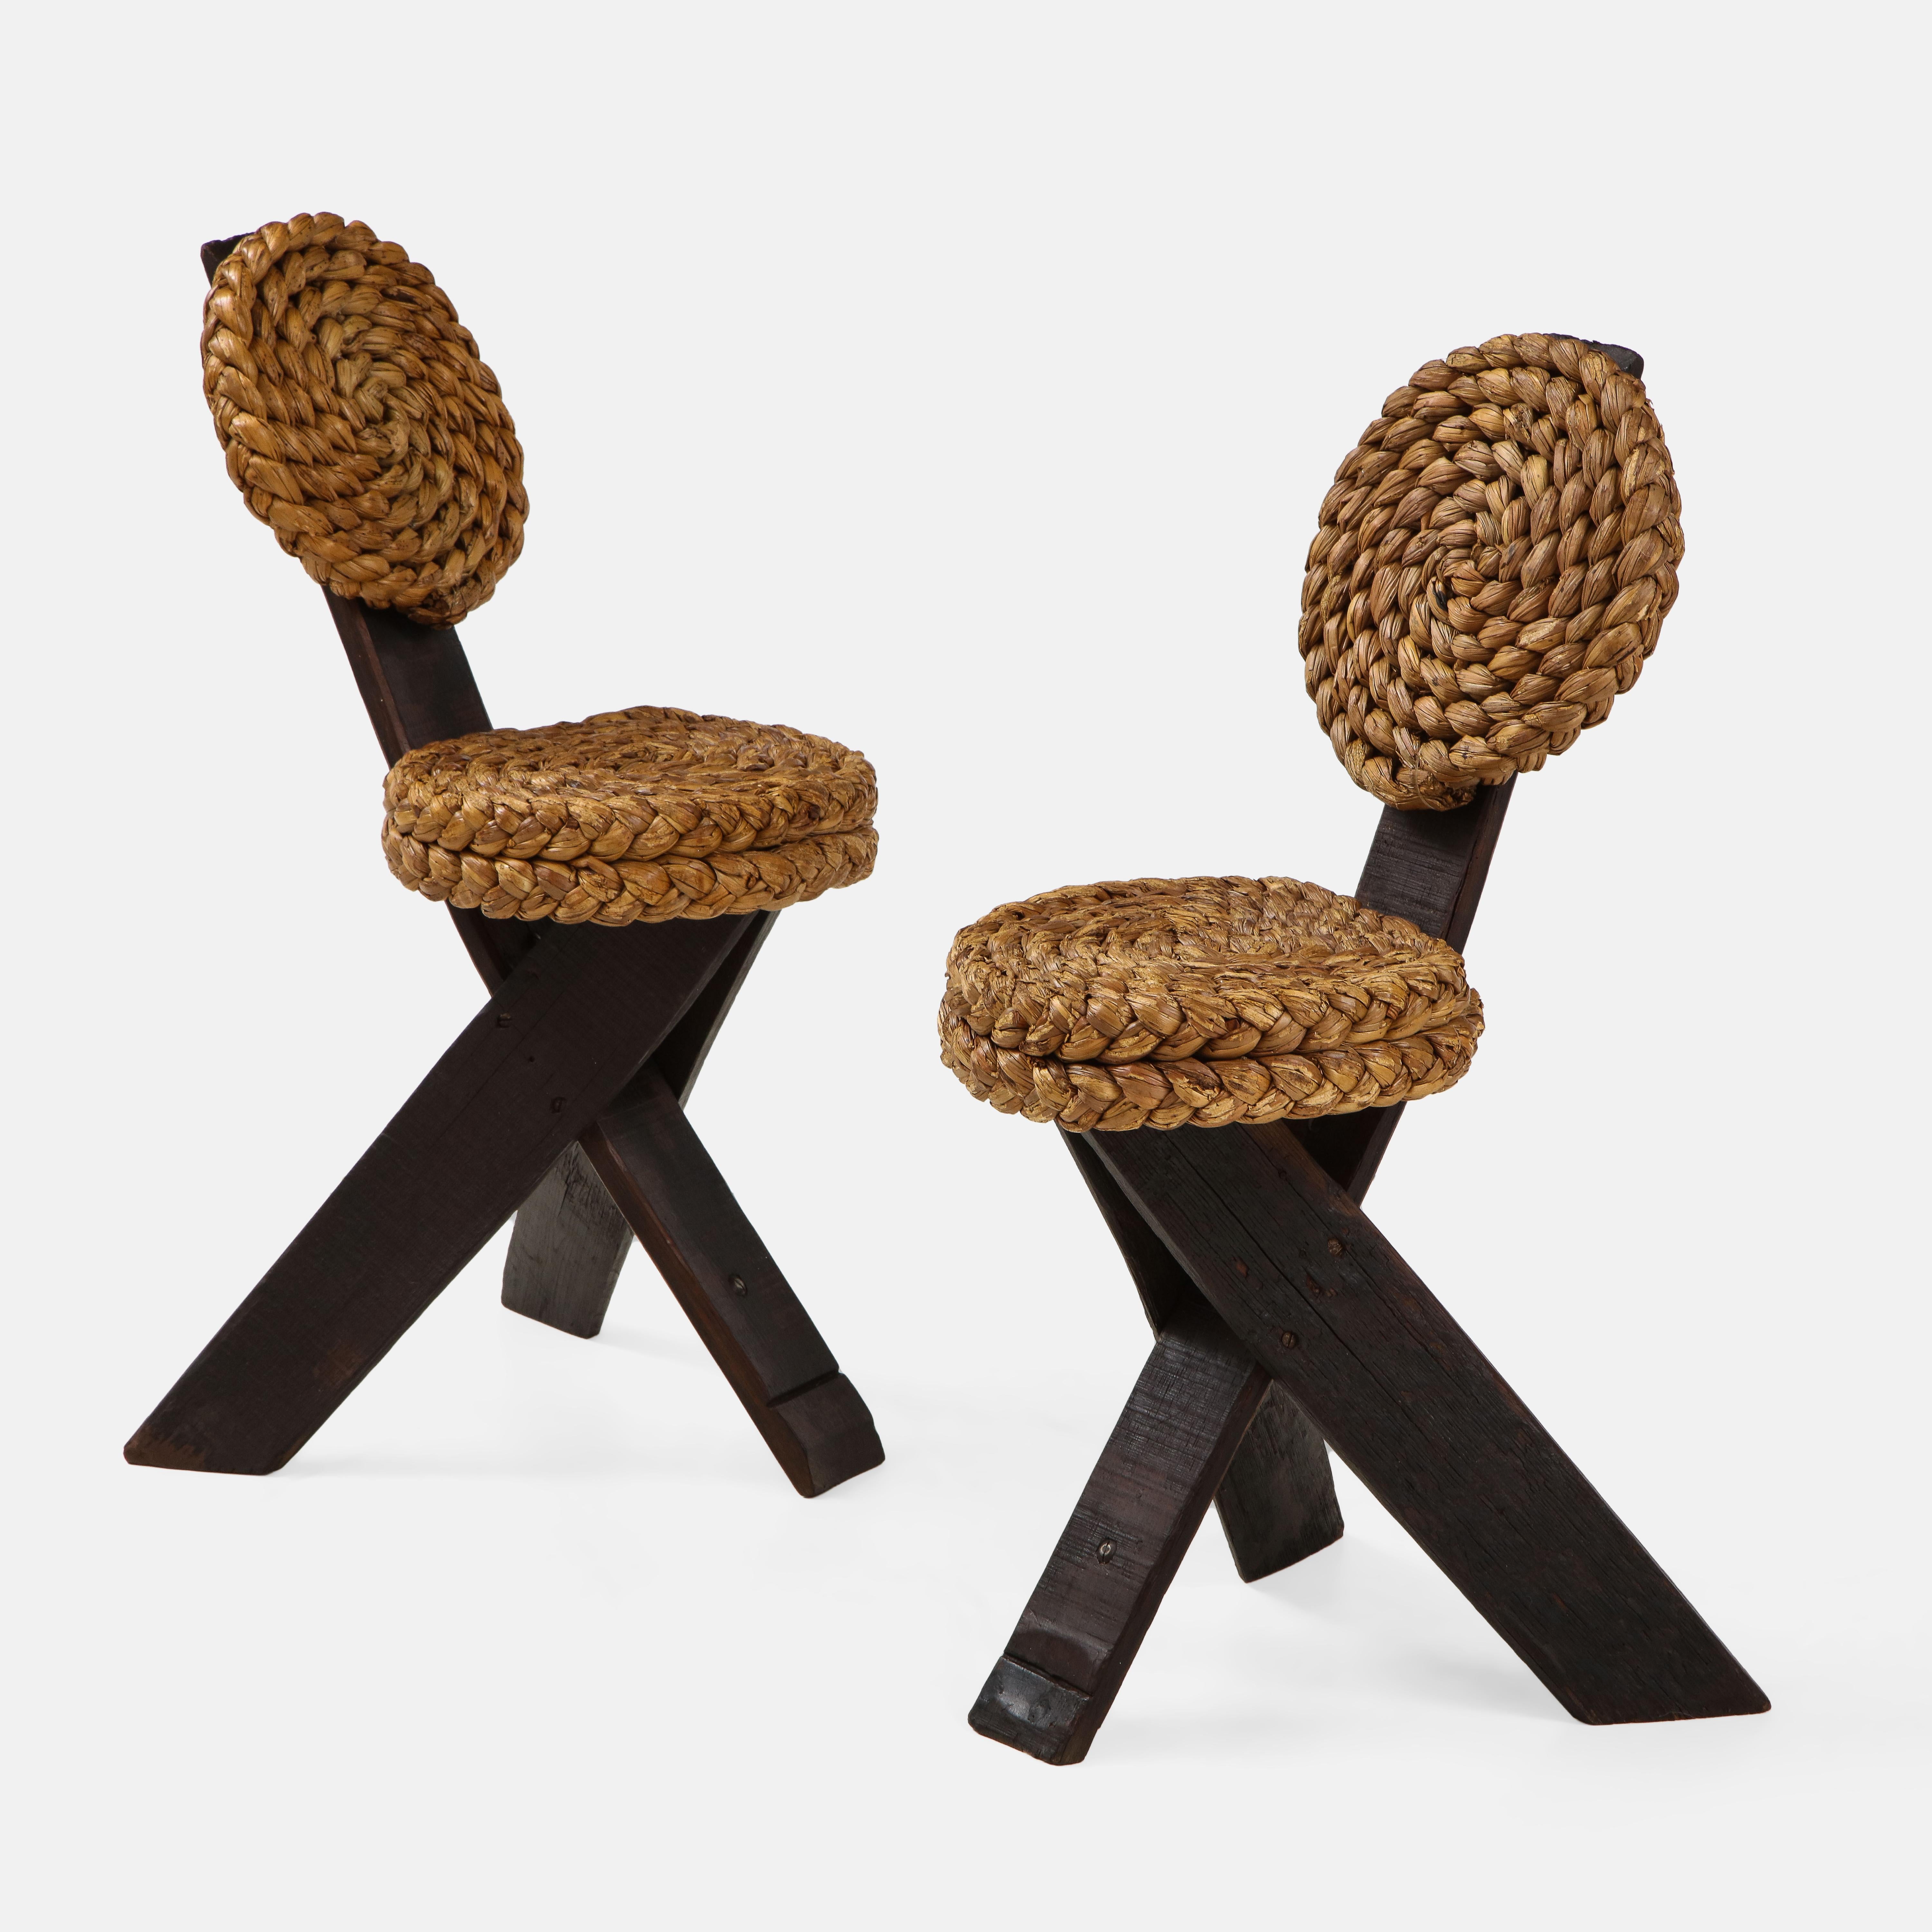 Adrien Audoux and Frida Minet rare pair of brutalist side chairs with braided rope backs and seats on stained wood frames ending in tripod legs. These unusual sculptural chairs are a typical Audoux et Minet modernist design incorporating elements of